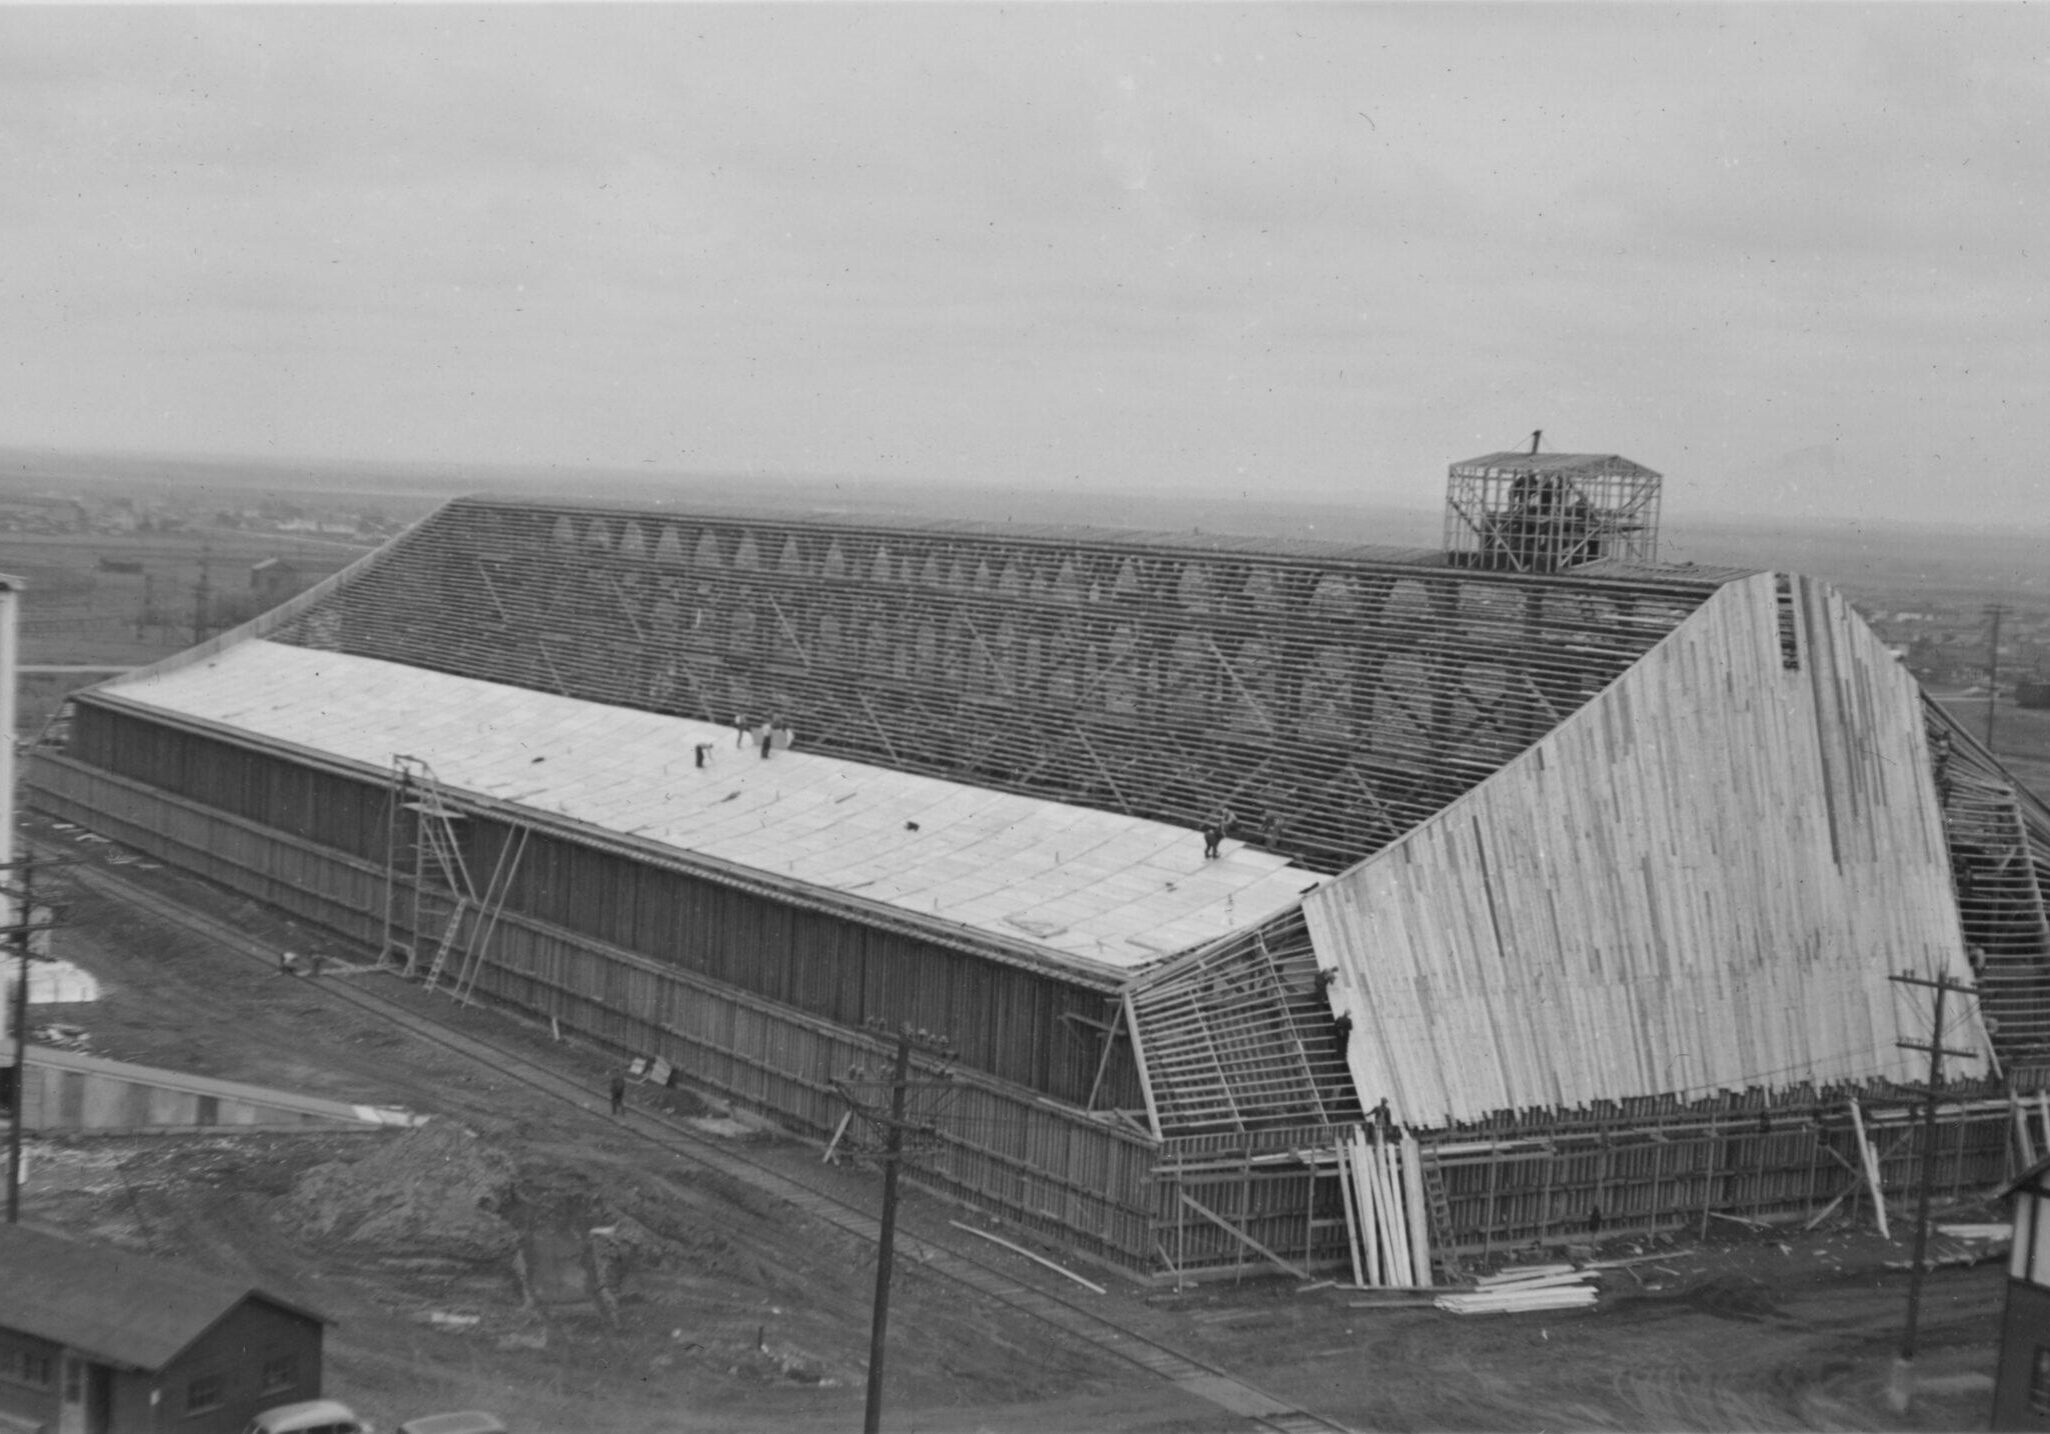 WAR DISTRESS ANNEX Installing Roof Covering May 27, 1941 7742